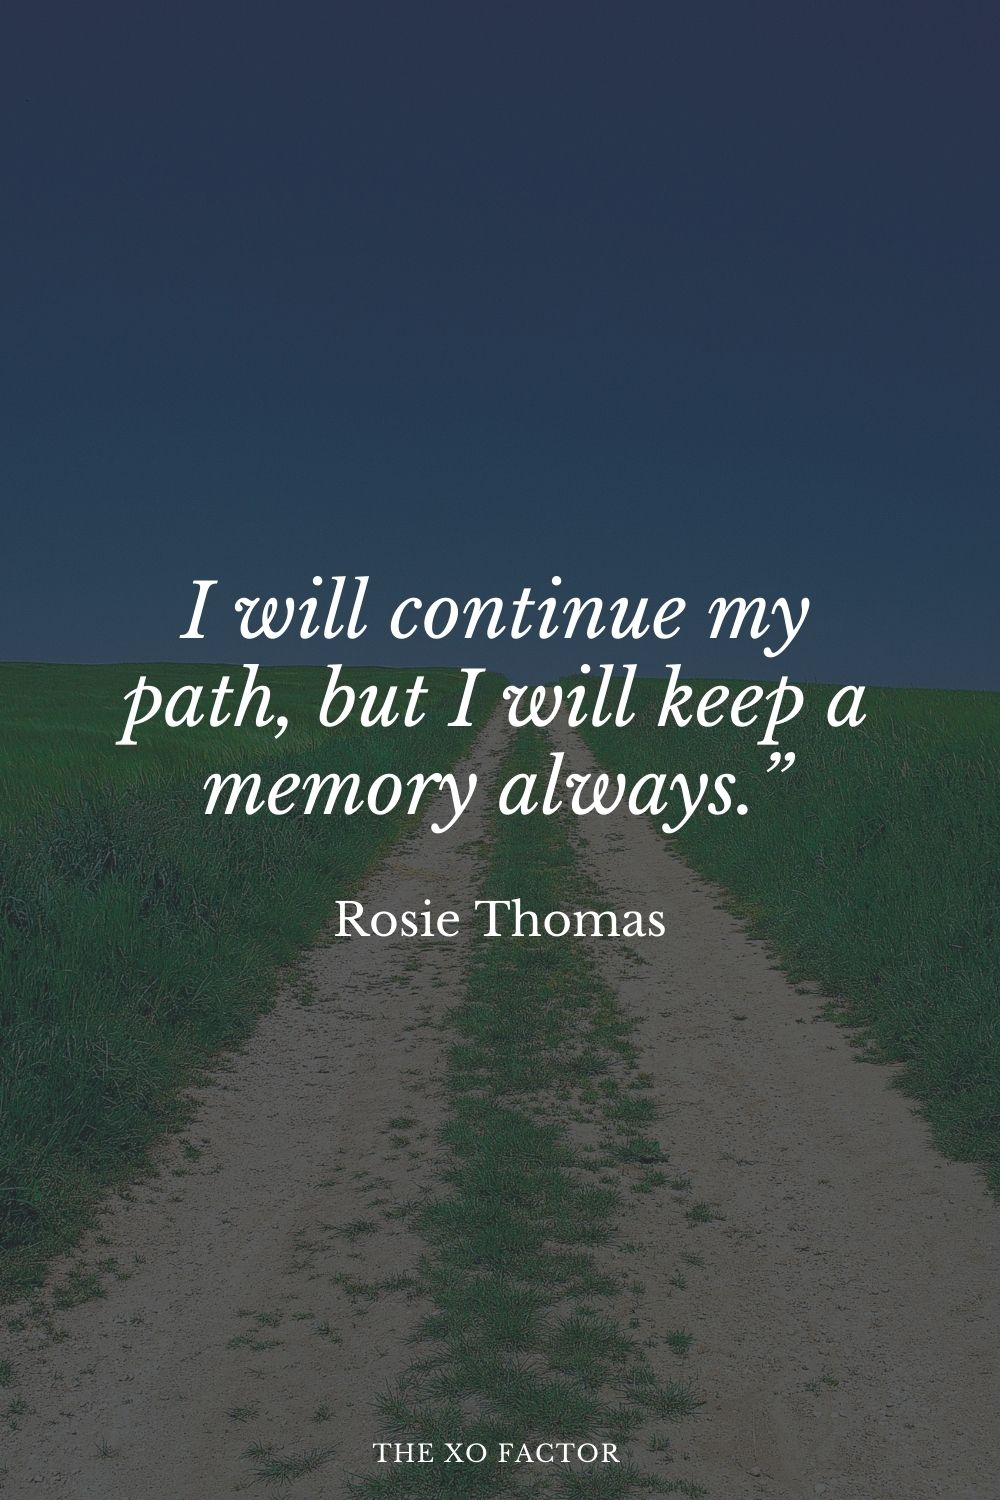 I will continue my path, but I will keep a memory always.” Rosie Thomas